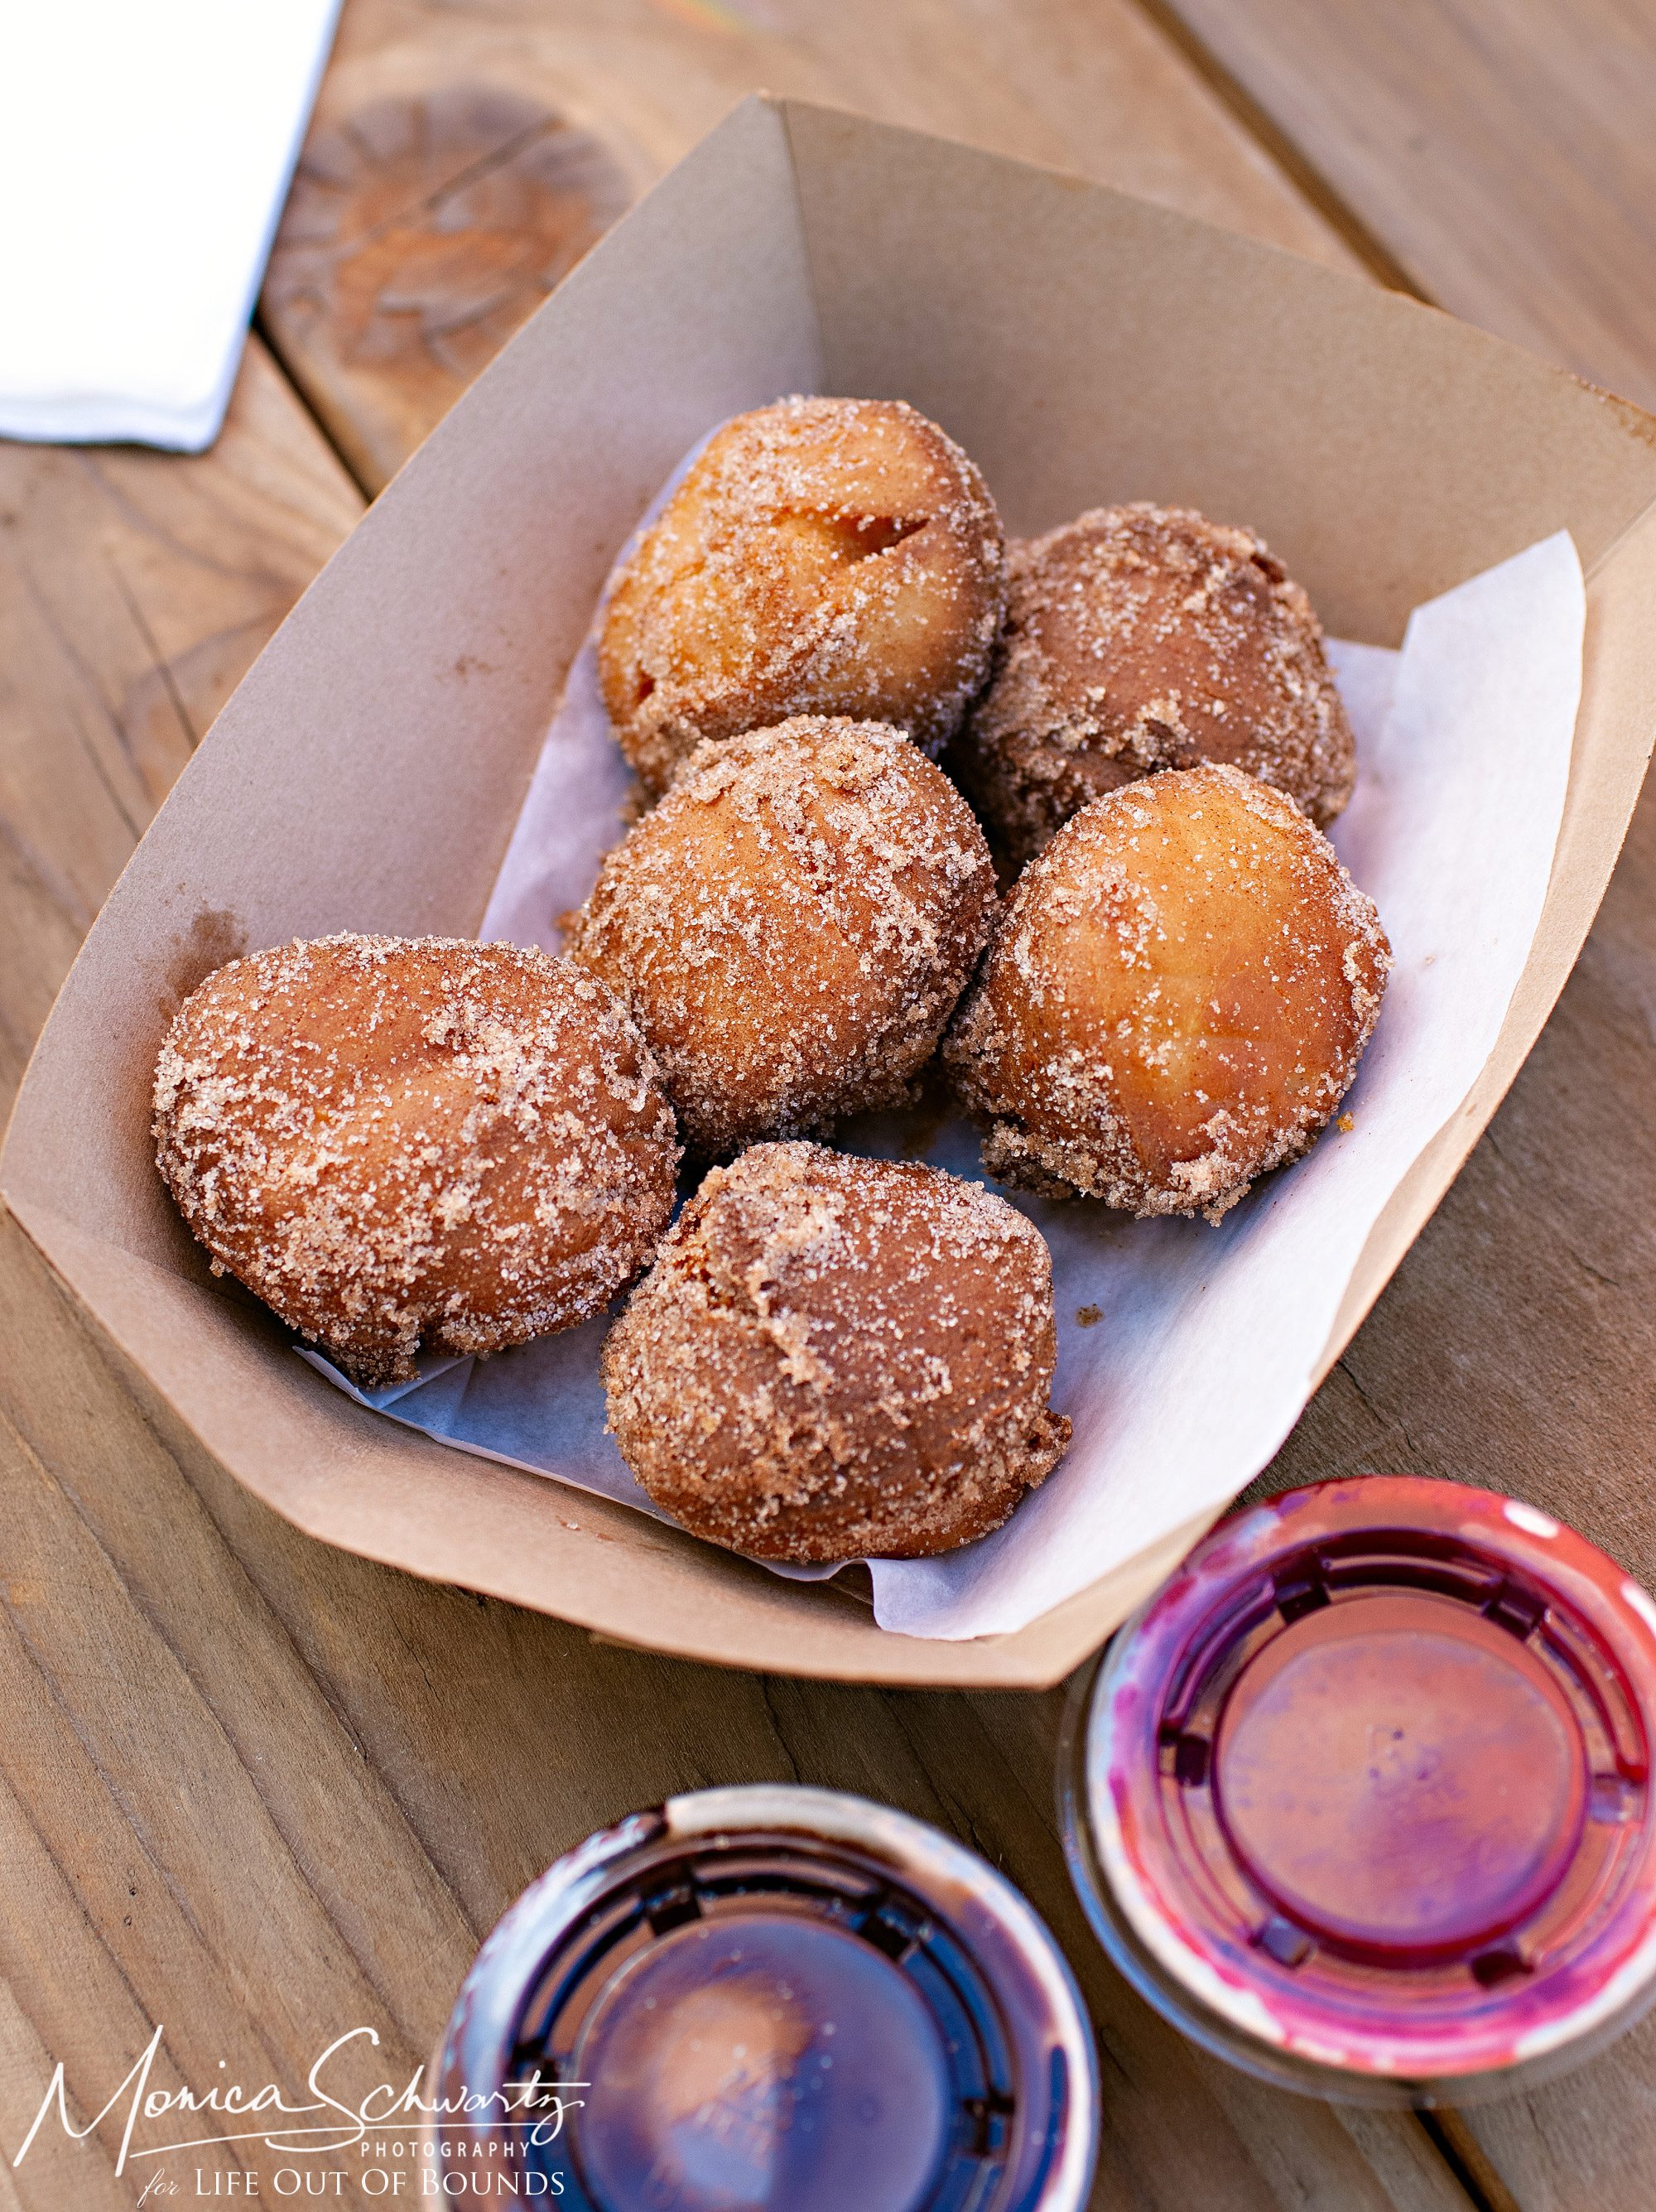 Bowl-of-dunut-holes-with-raspberry-and-chocolate-sauces-by-the-Fig-Rig-food-truck-in-Sonoma-California